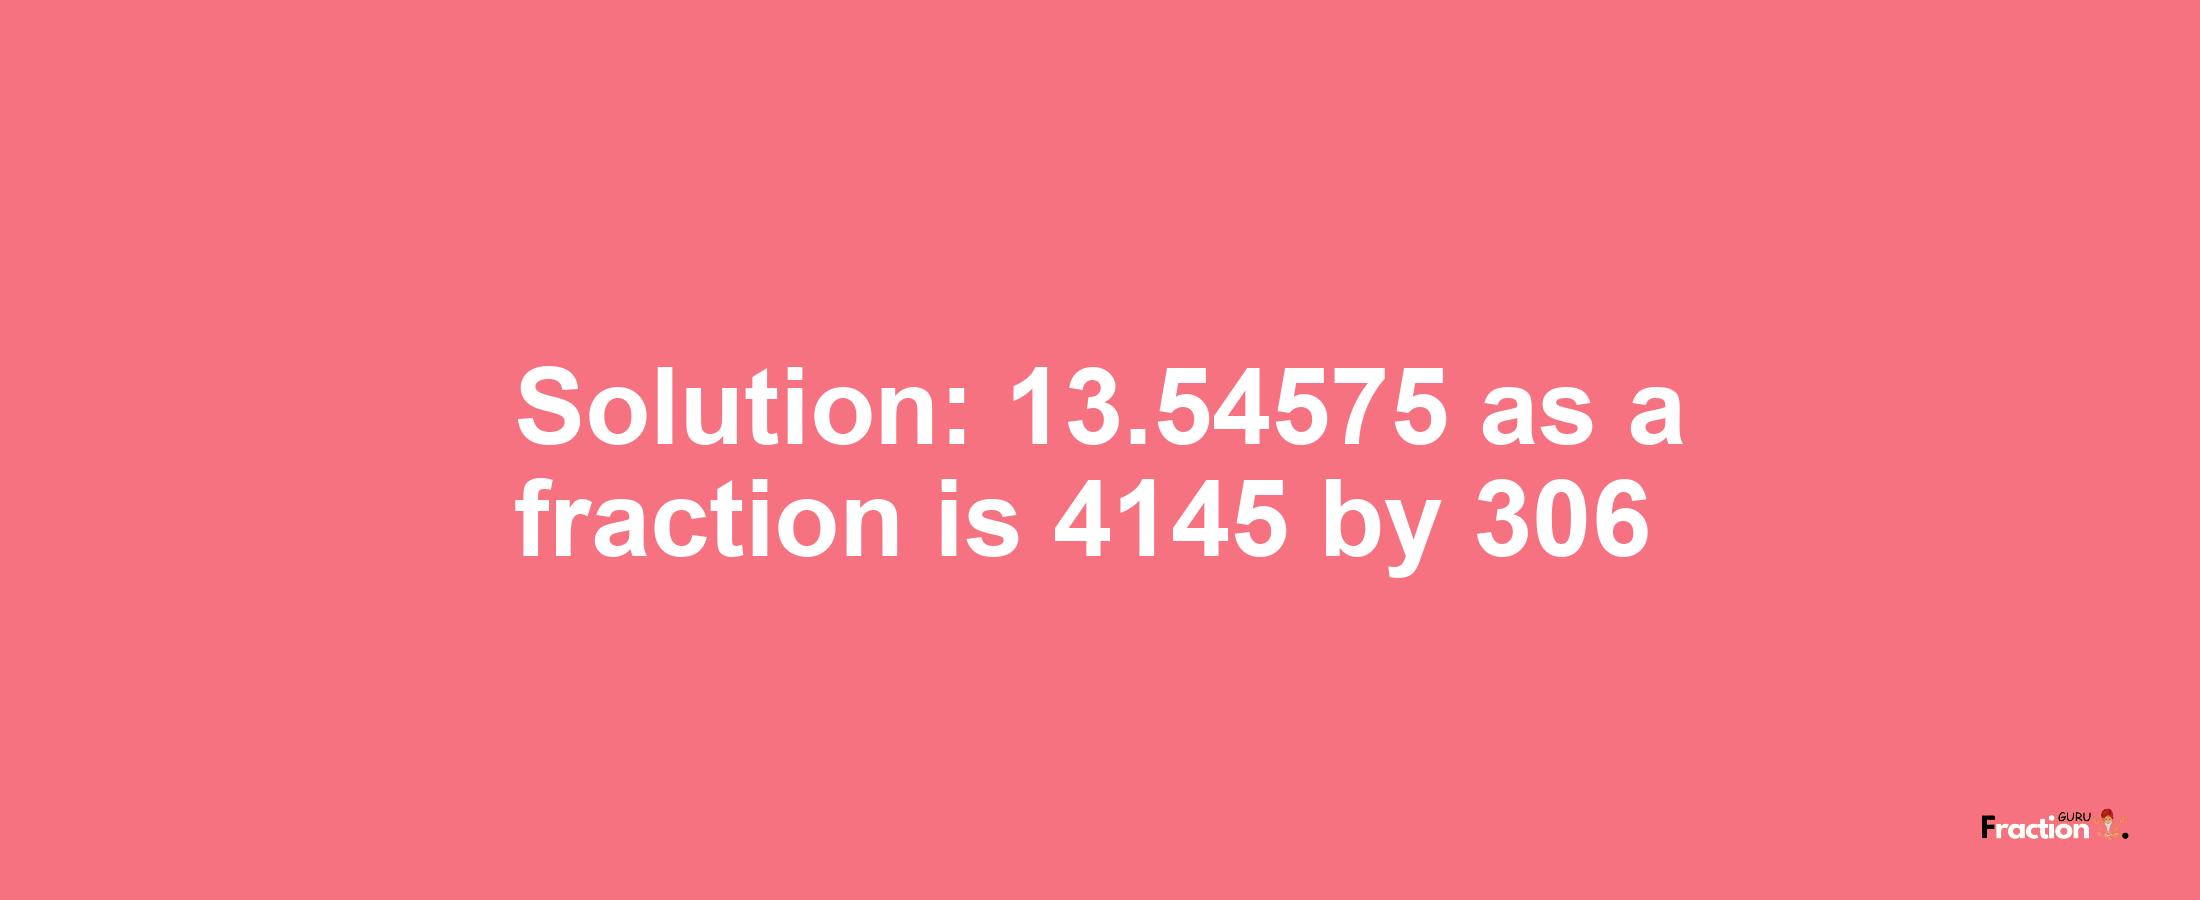 Solution:13.54575 as a fraction is 4145/306